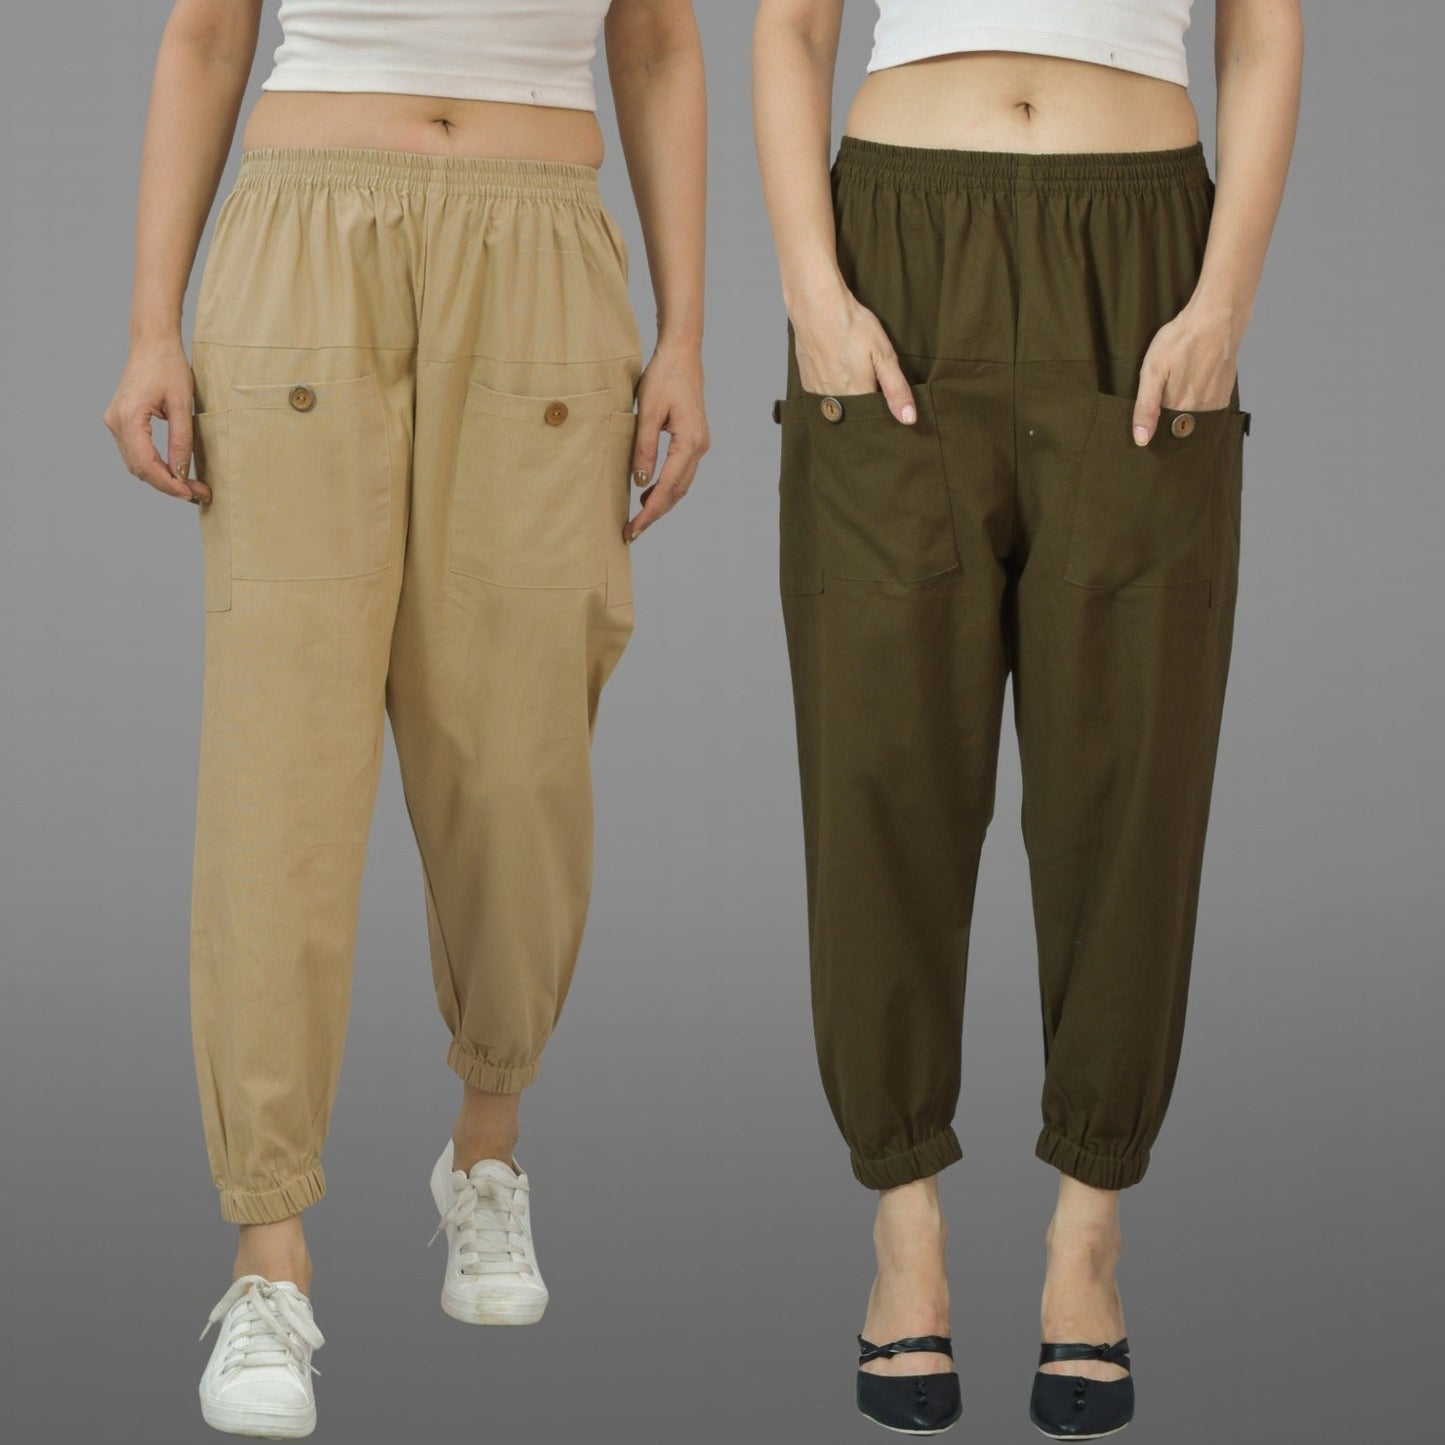 Combo Pack Of Womens Beige And Dark Green Four Pocket Cotton Cargo Pants